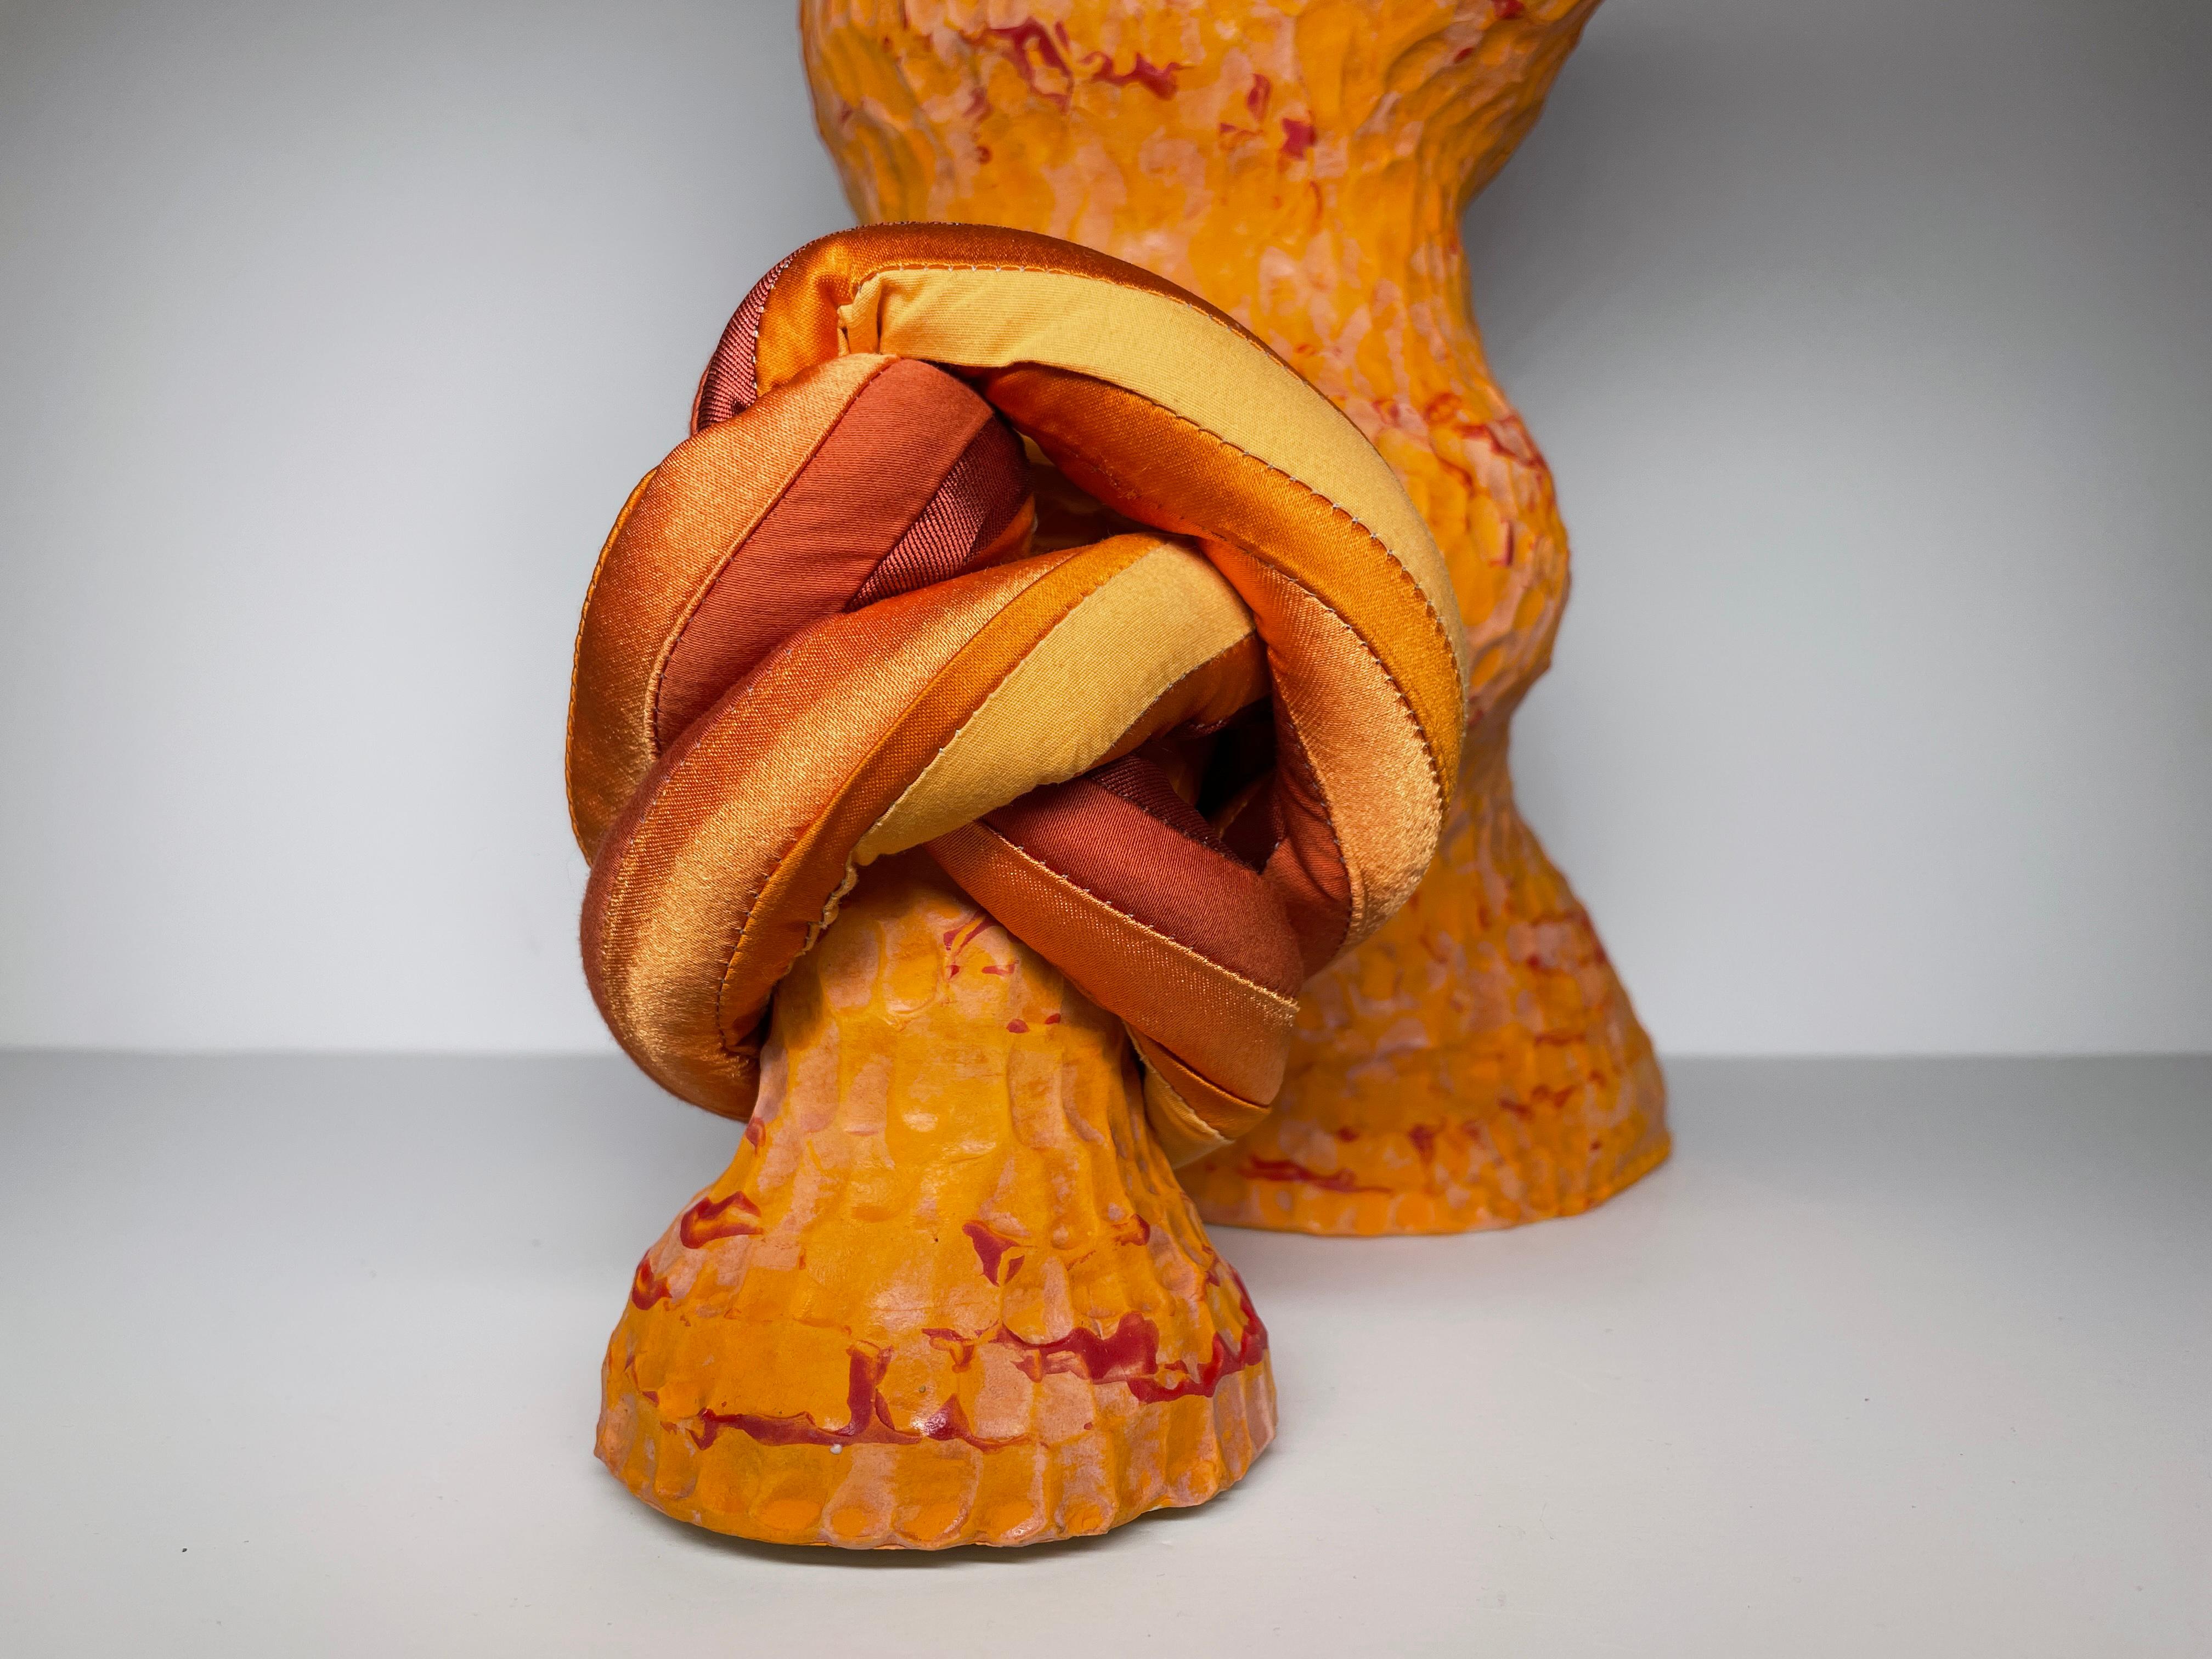 This is part of a new collection work that encompasses ceramics and textiles by Ak Jansen. Born in the Netherlands, Jansen’s work occupies queerness on both poetic and political terms, and honors queer community’s ethic of creative self-making. The